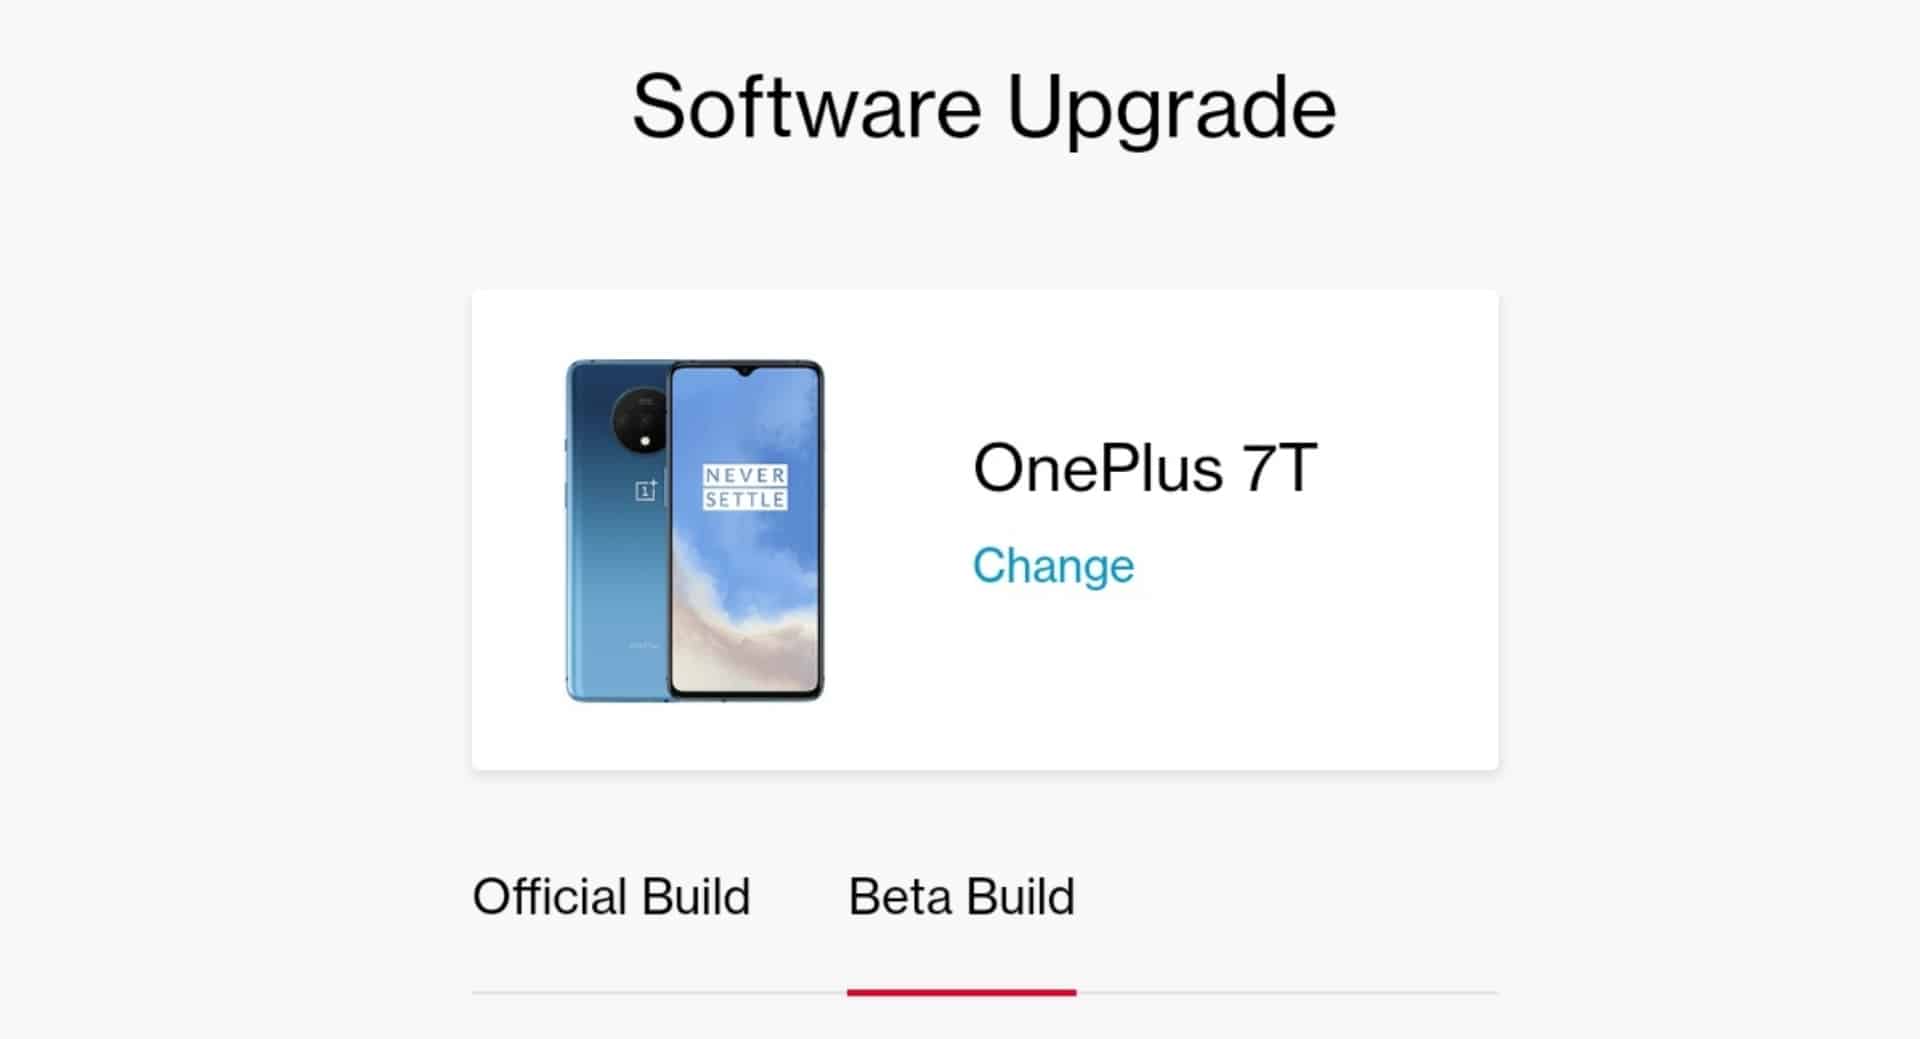 OnePlus 7T Series Receives OxygenOS Open Beta 7 With August 2020 Security Patch